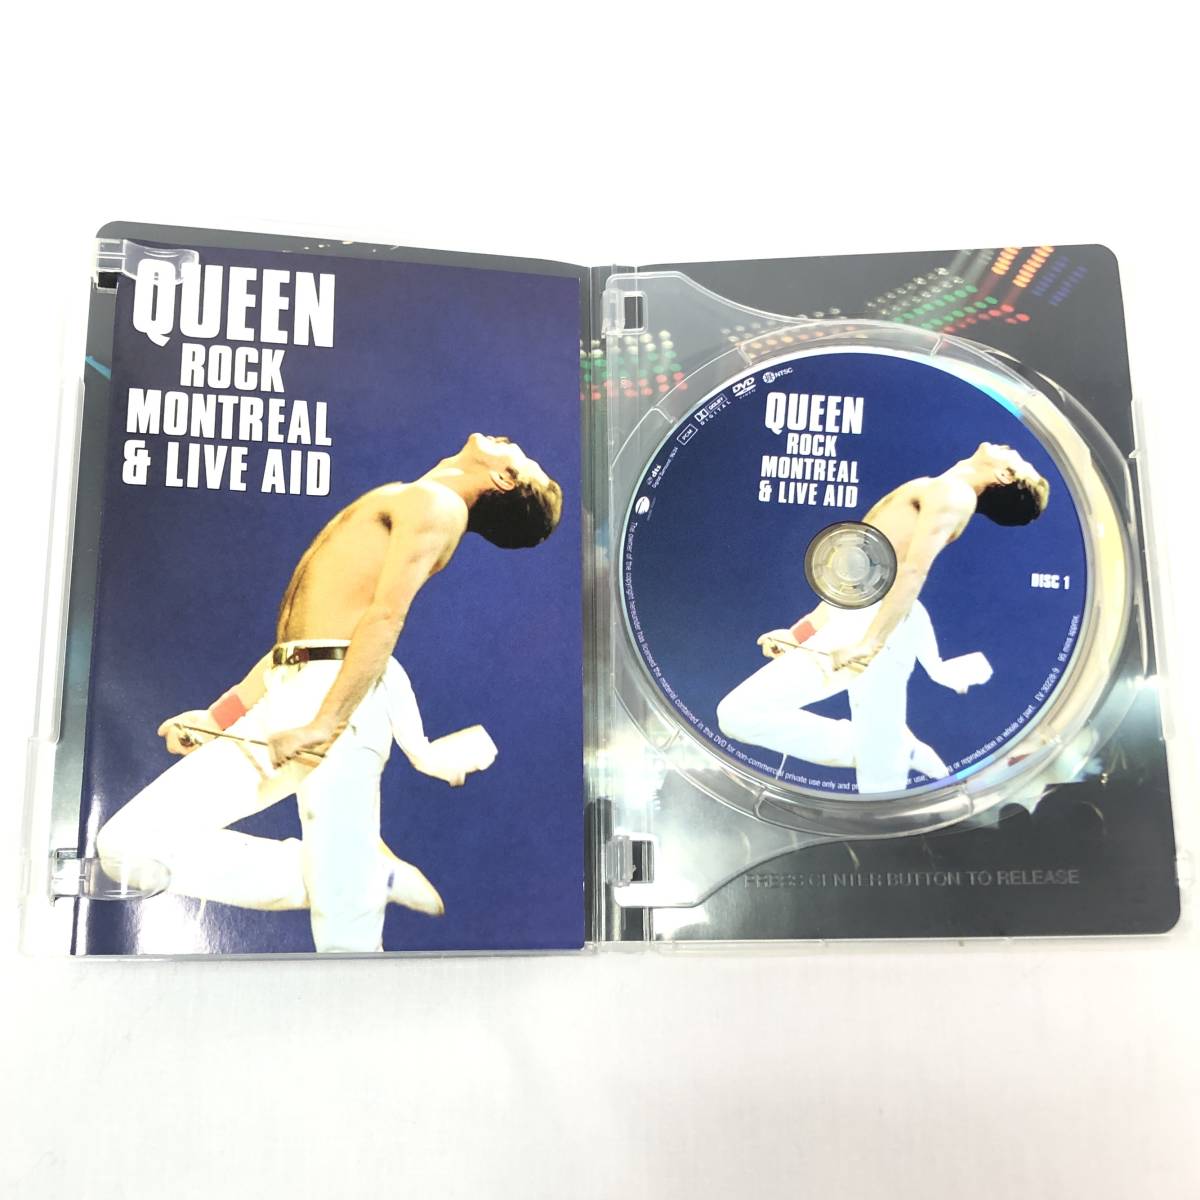 ＊[DVD]QUEEN ROCK MONTREAL & LIVE AID 2枚組 クイーン モントリオール 1981 ロック_画像3